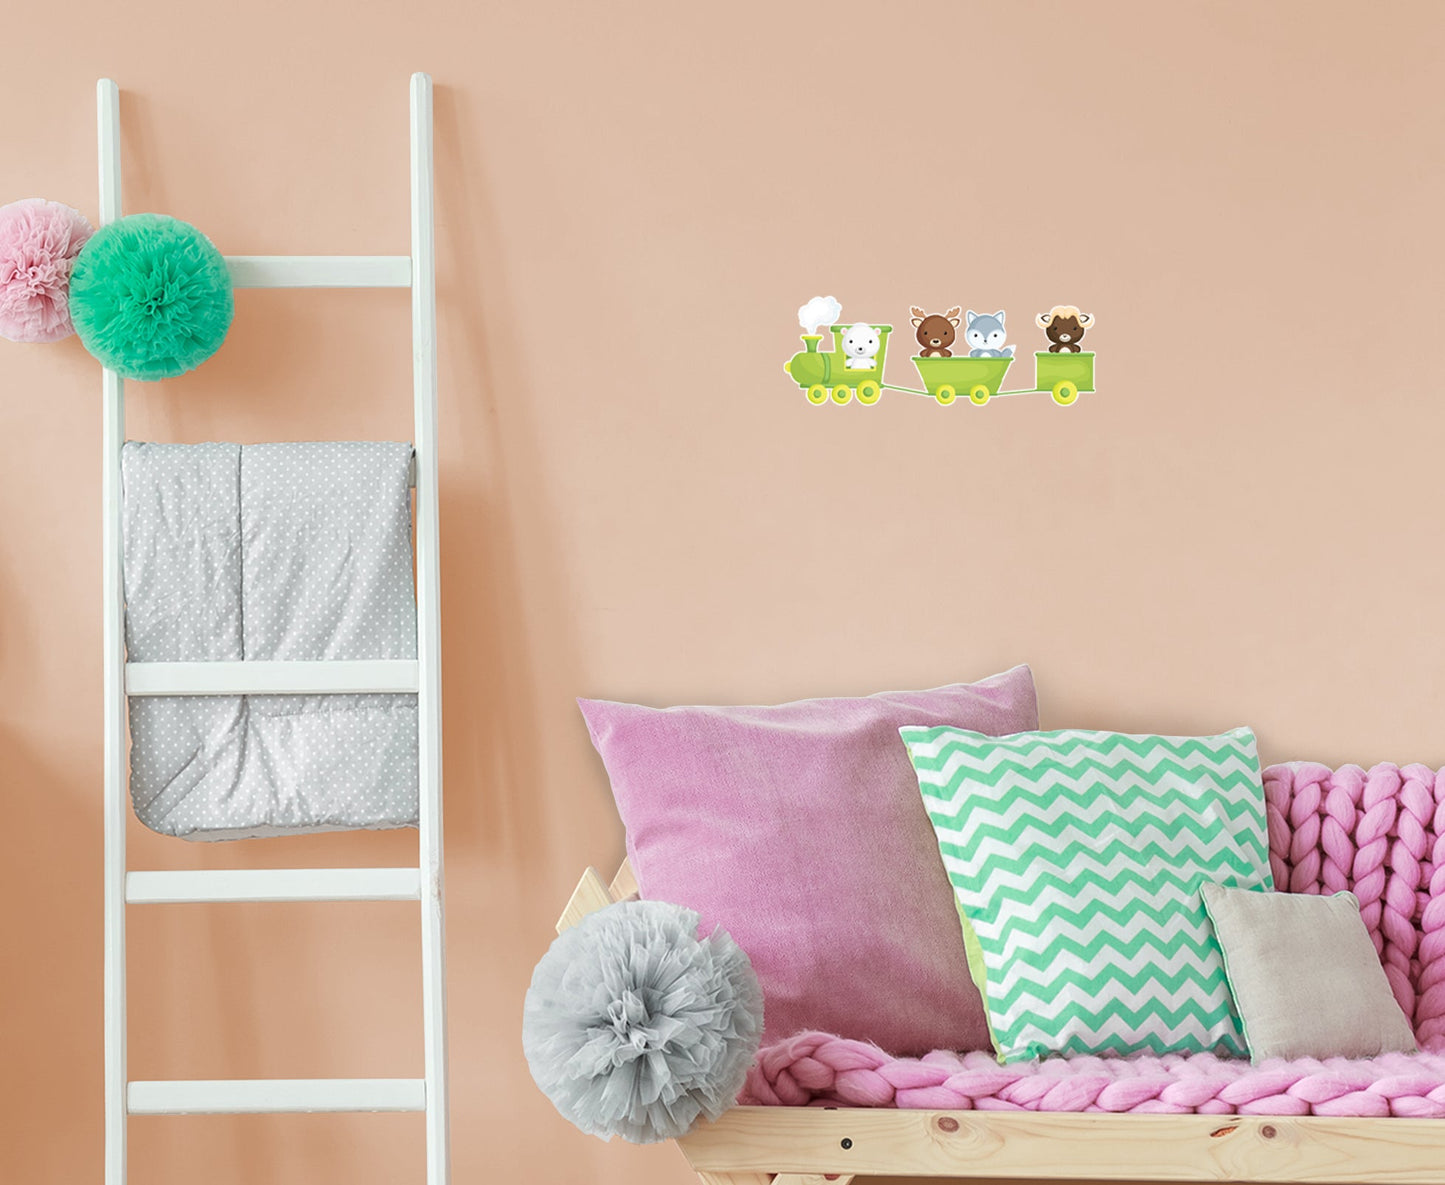 Nursery:  Green Train Icon        -   Removable Wall   Adhesive Decal